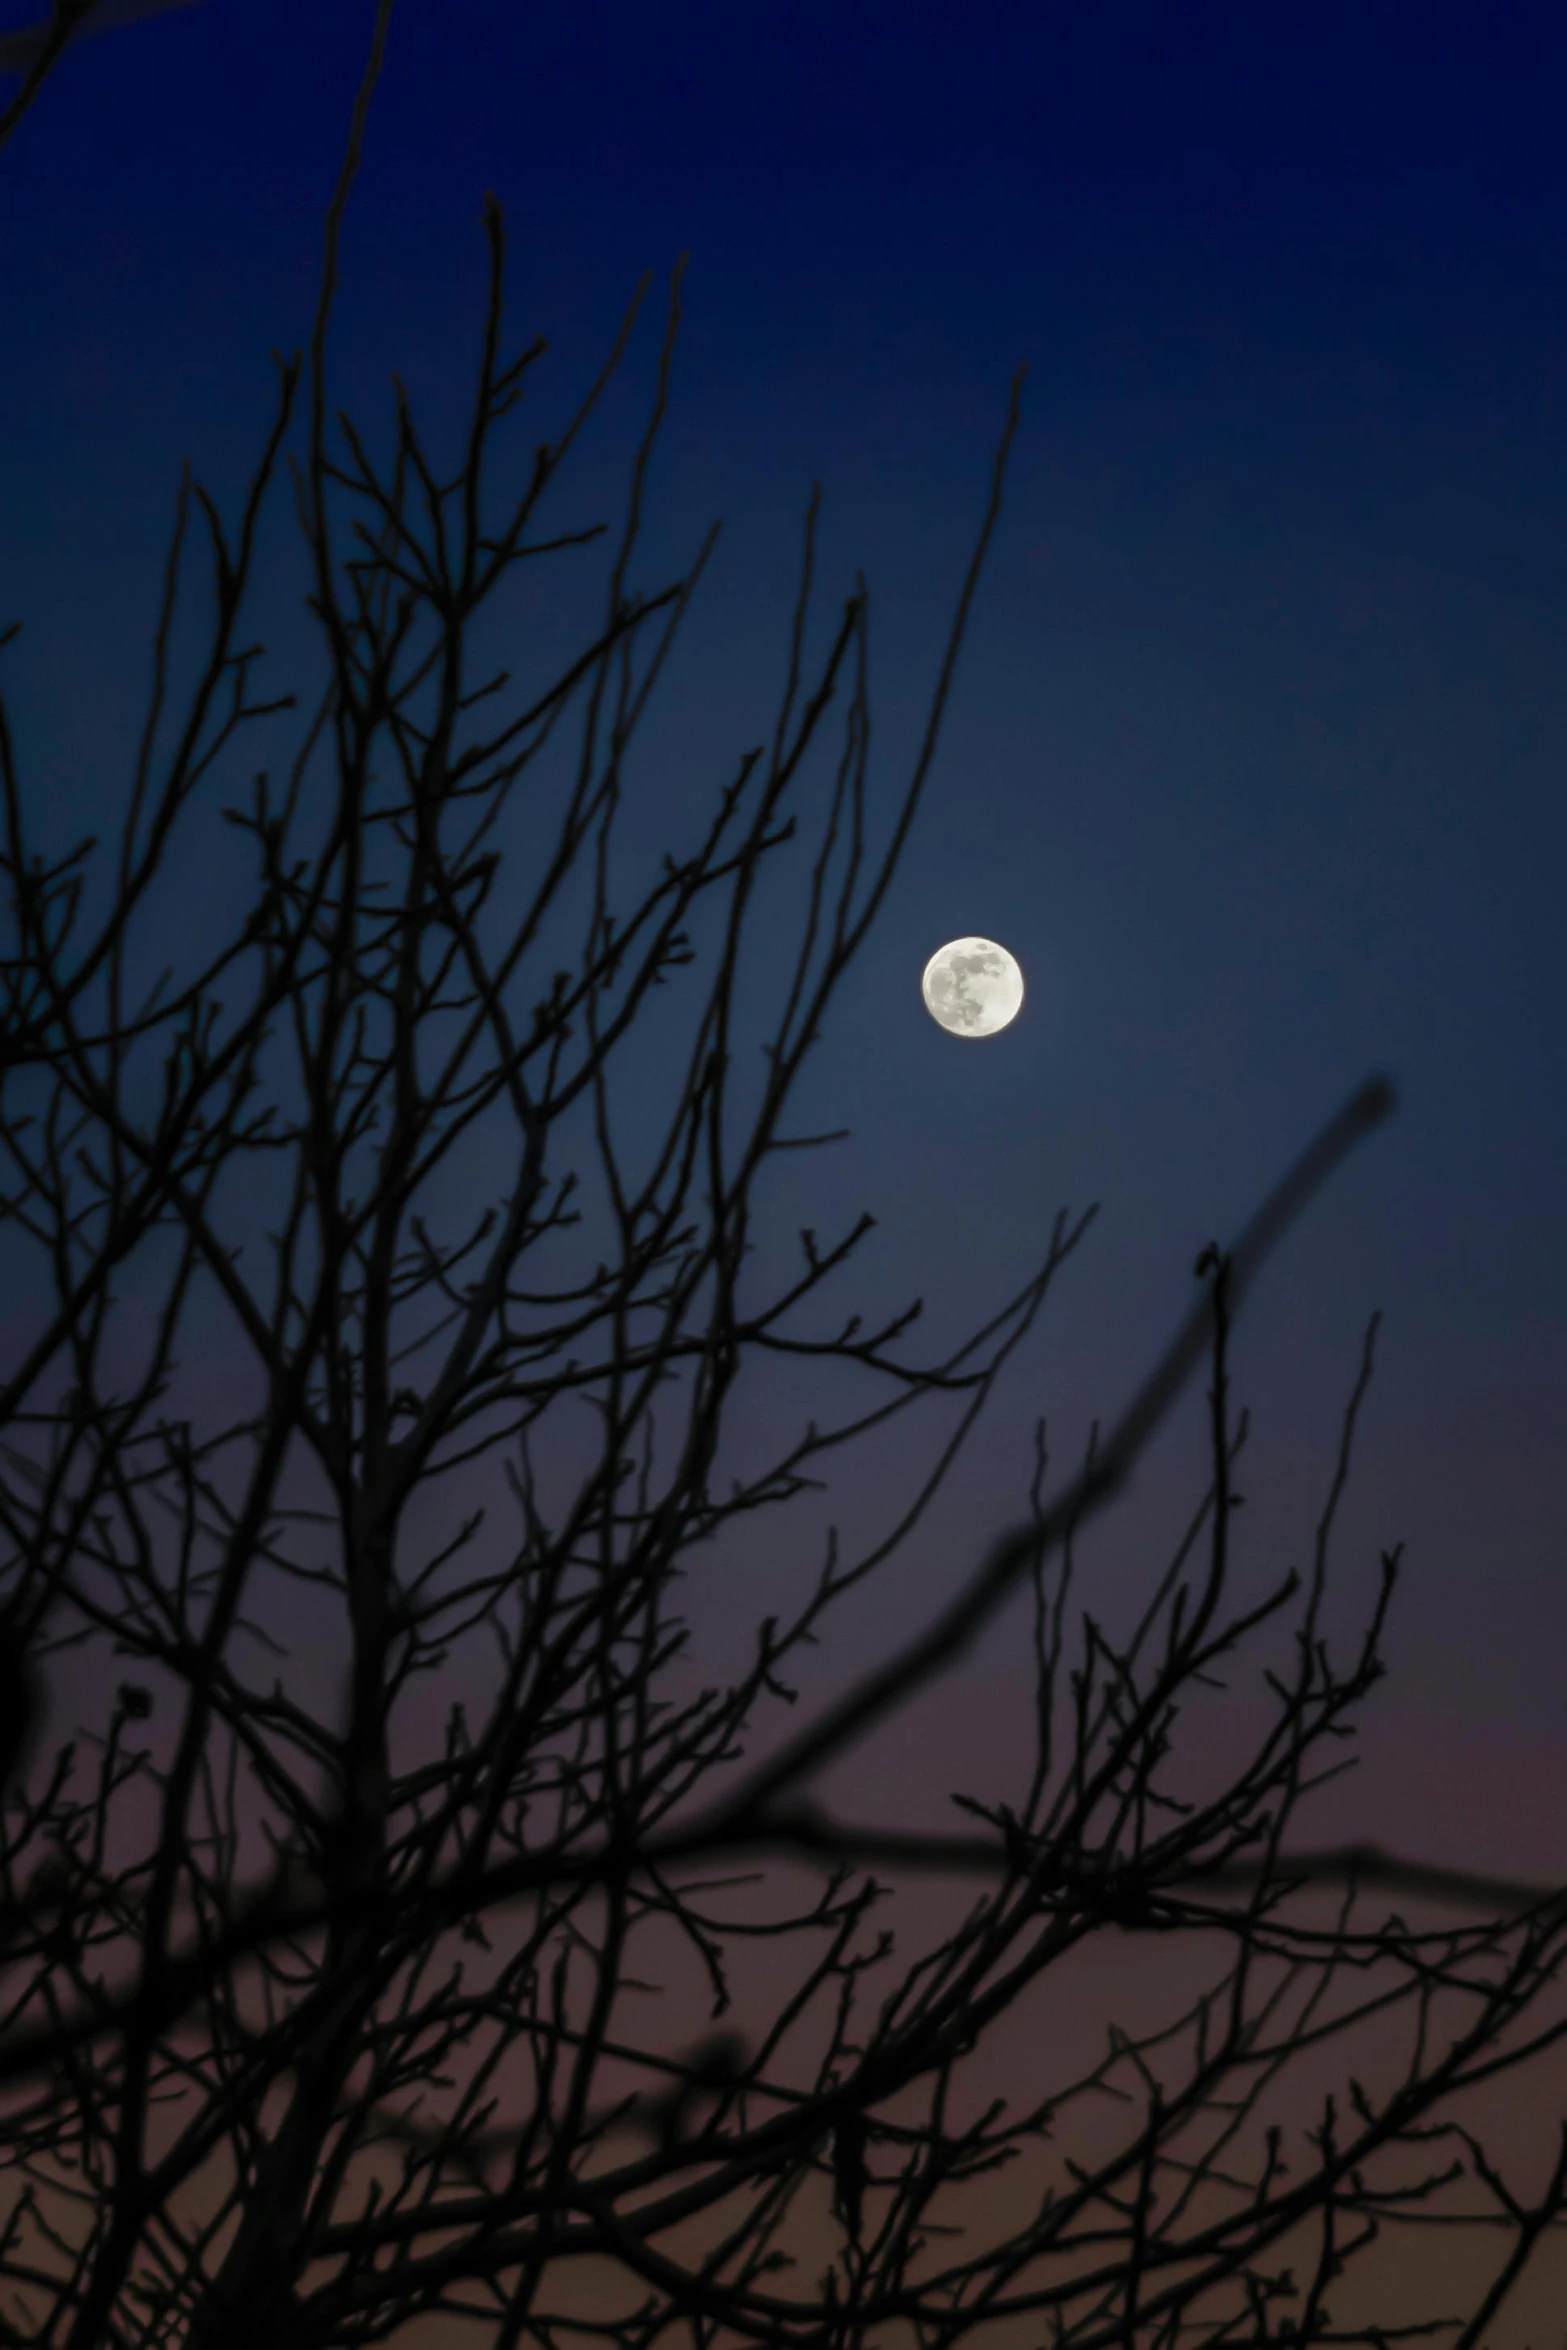 the moon shines in the sky behind some leafless trees